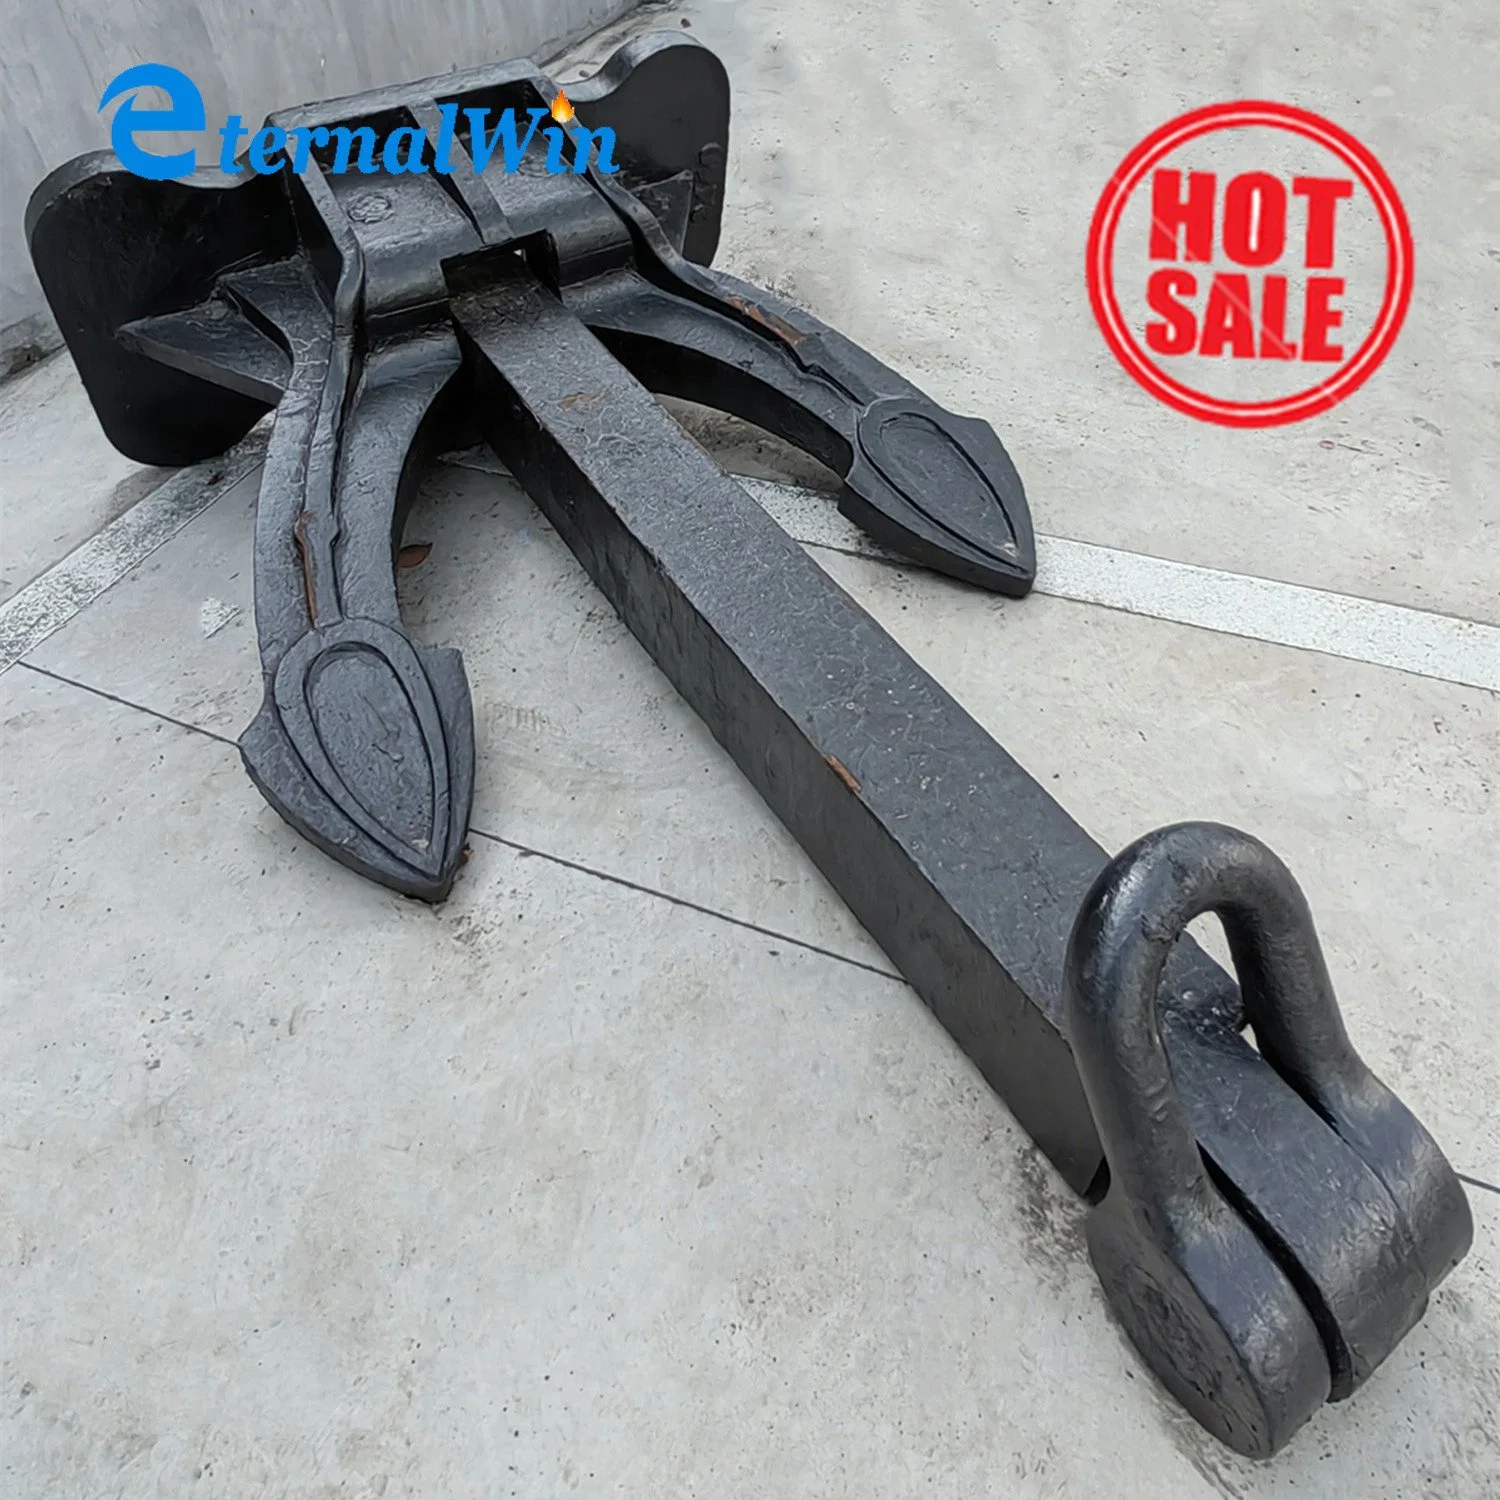 China Stockless Anchor High Holding Power Steel Boat Marine Ship Anchors Delta Anchor Price